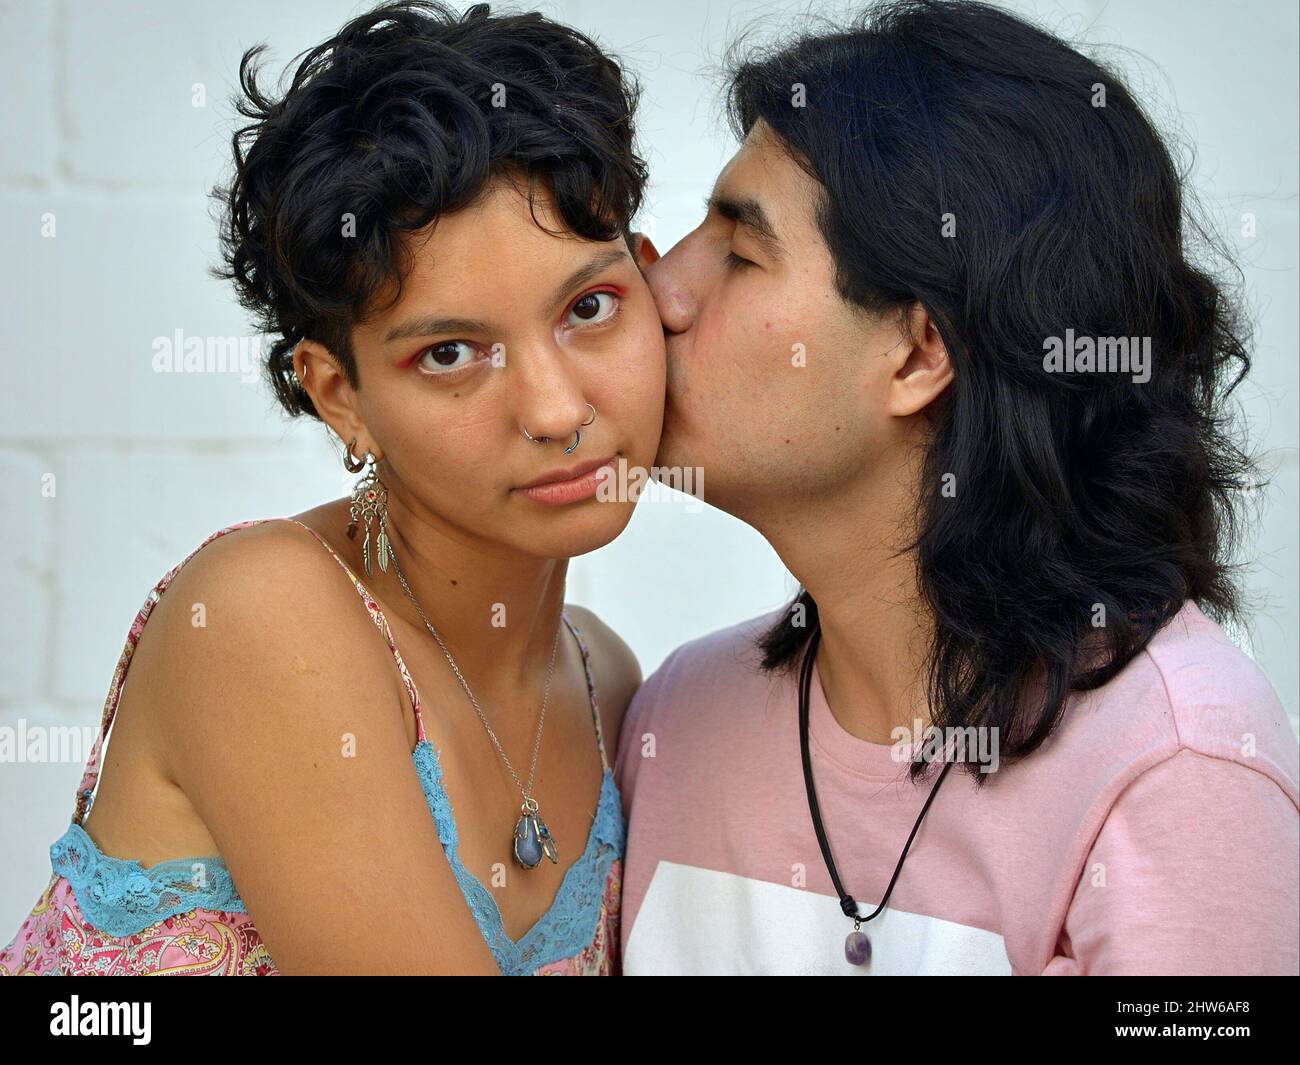 A handsome Mexican young Latino man with long hair kisses a beautiful Mexican young Latina woman with short hair on her cheek. Stock Photo